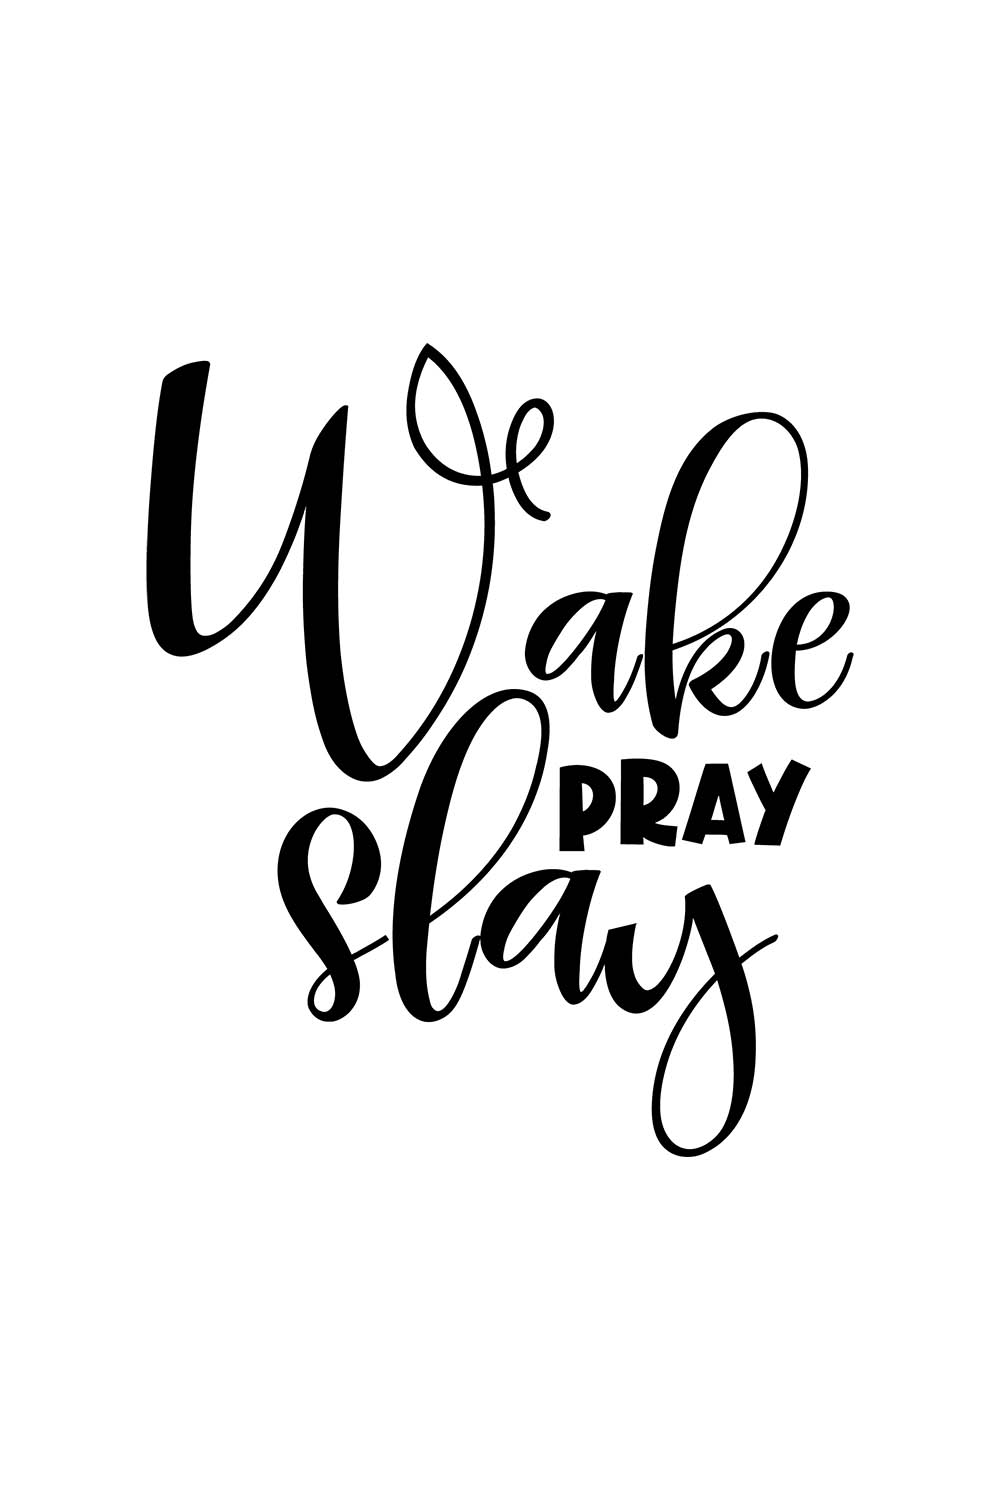 Image with unique black lettering for Wake Pray Slay prints.